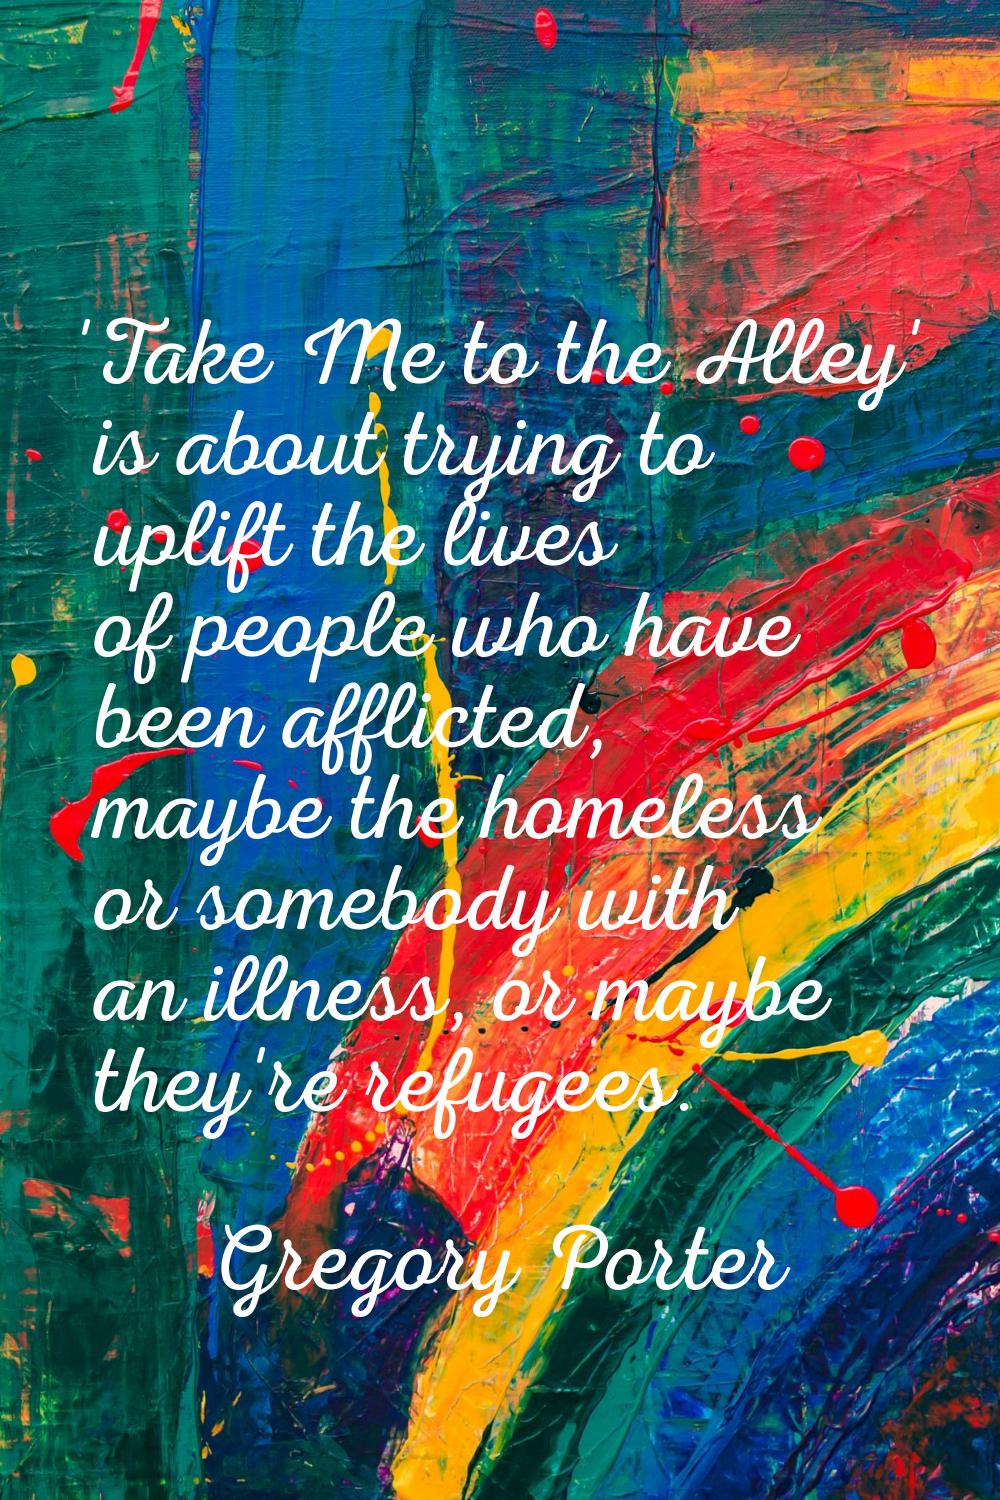 'Take Me to the Alley' is about trying to uplift the lives of people who have been afflicted, maybe